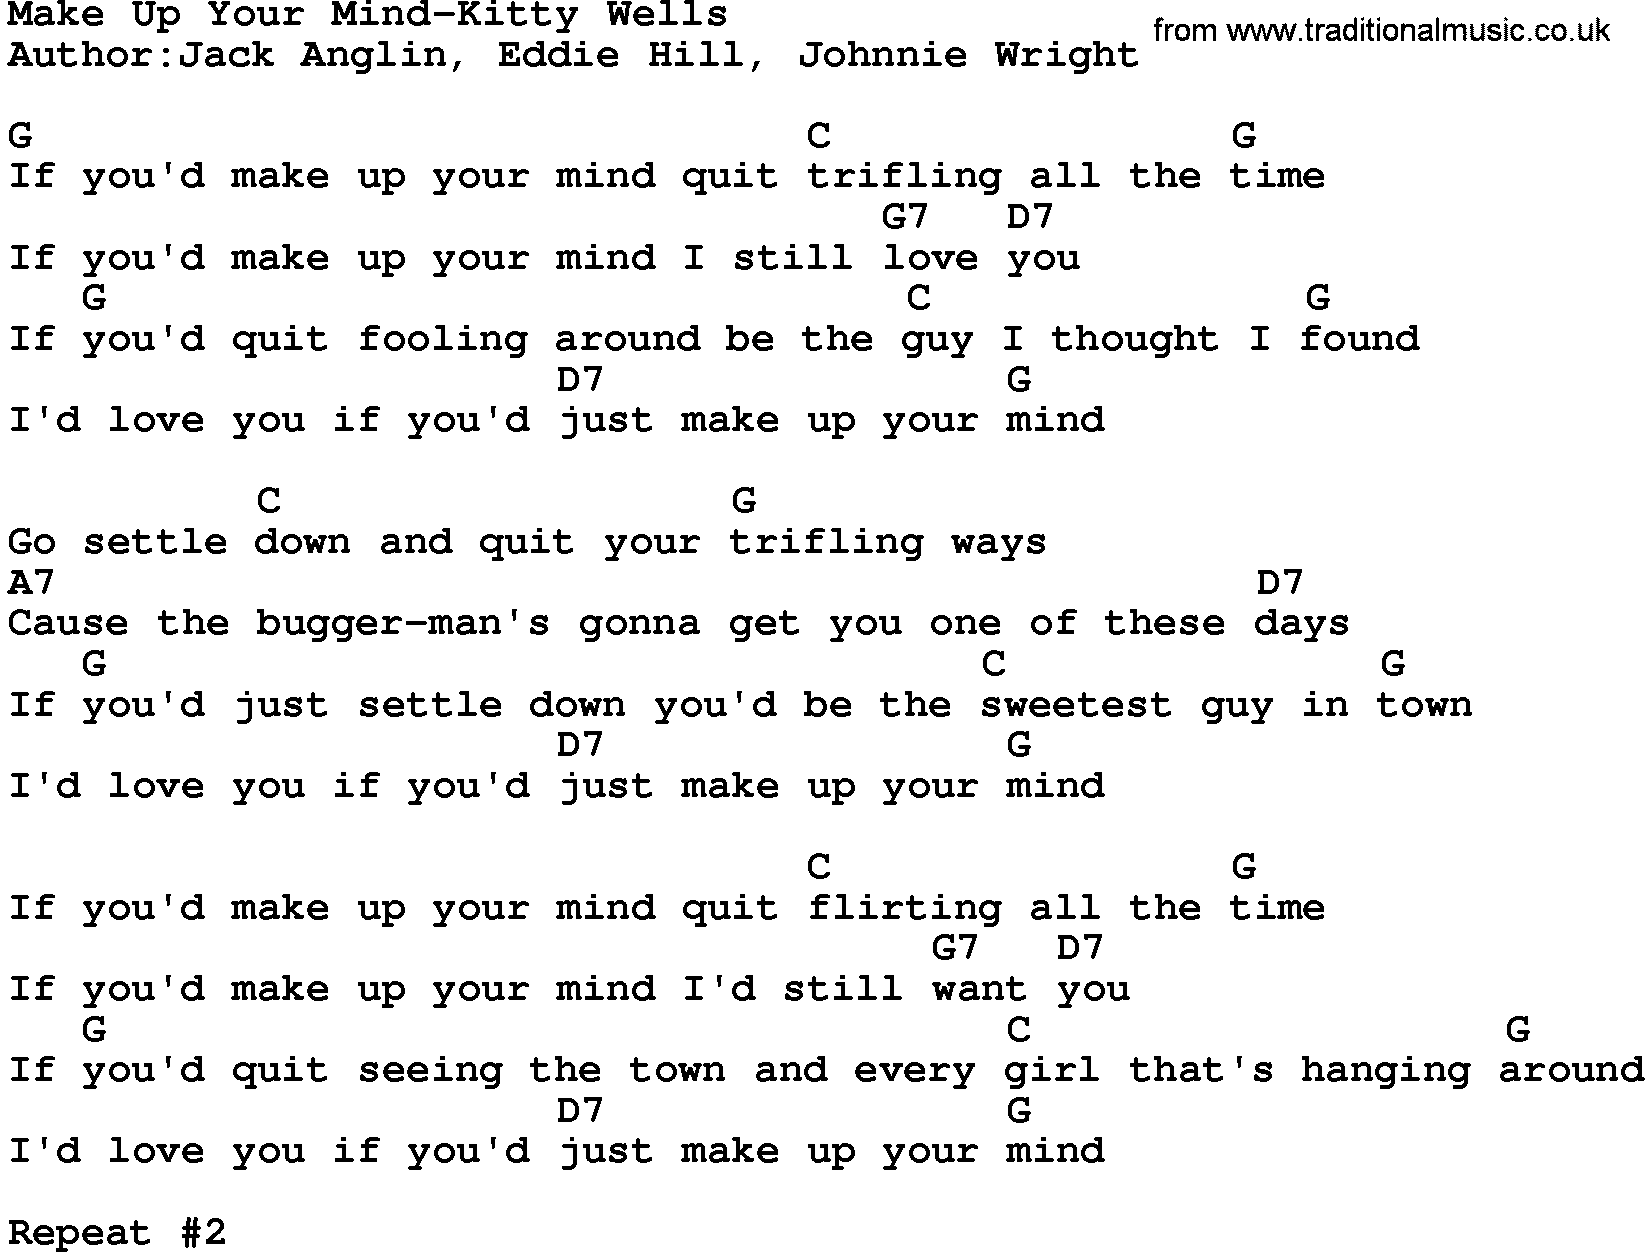 Country music song: Make Up Your Mind-Kitty Wells lyrics and chords